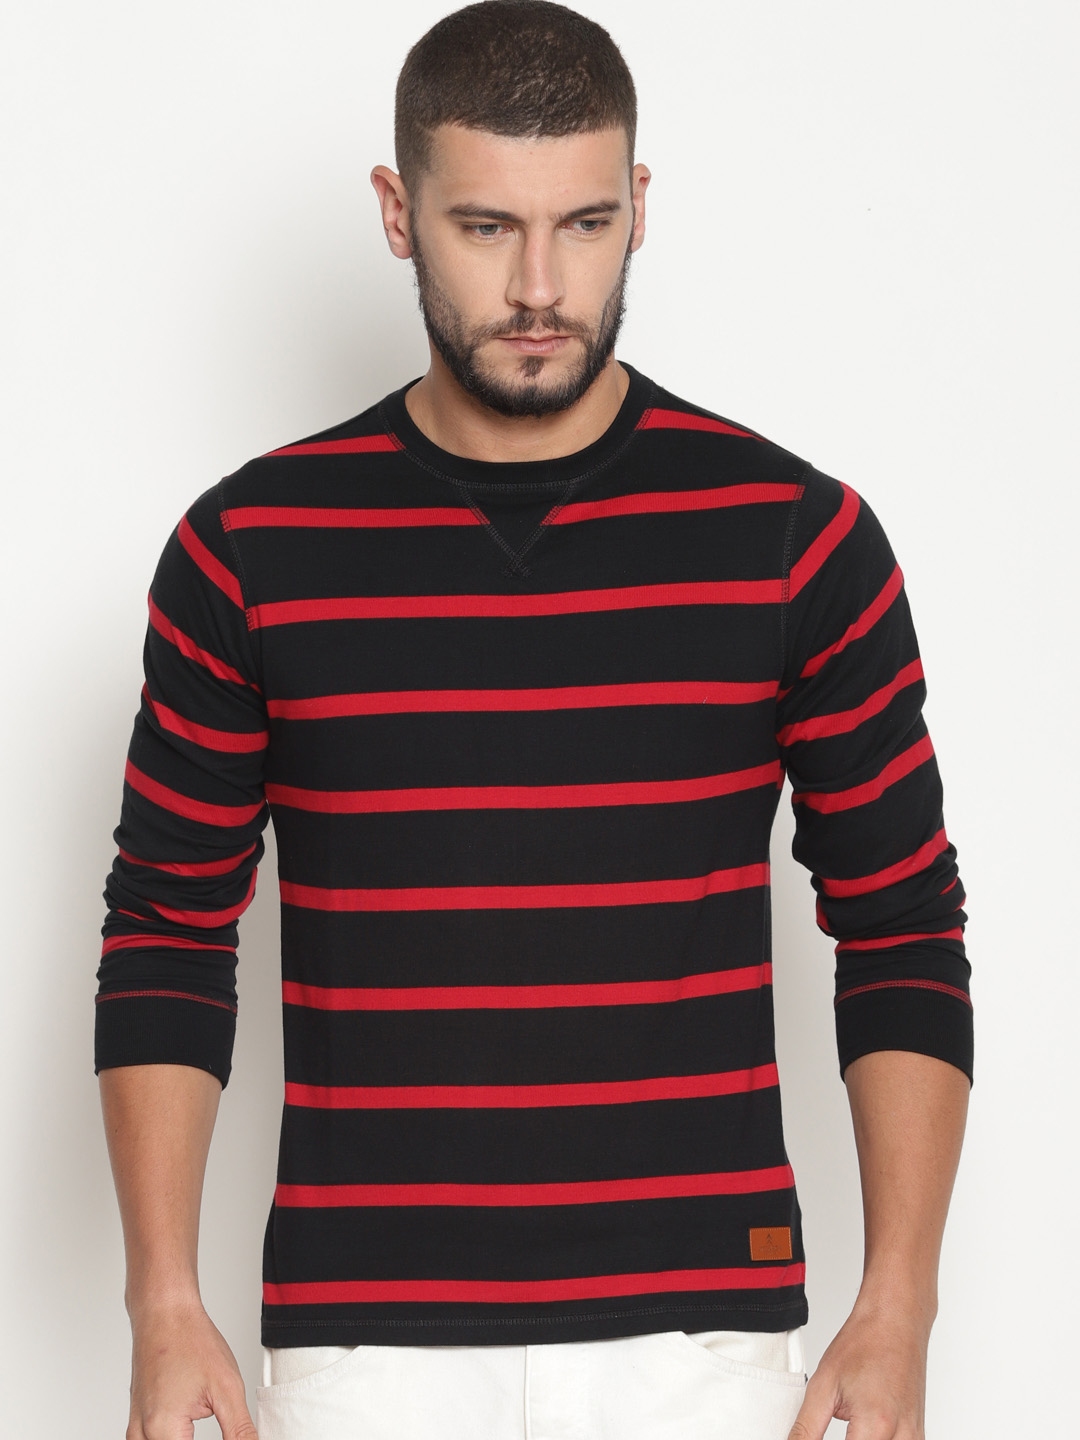 red striped tee shirt